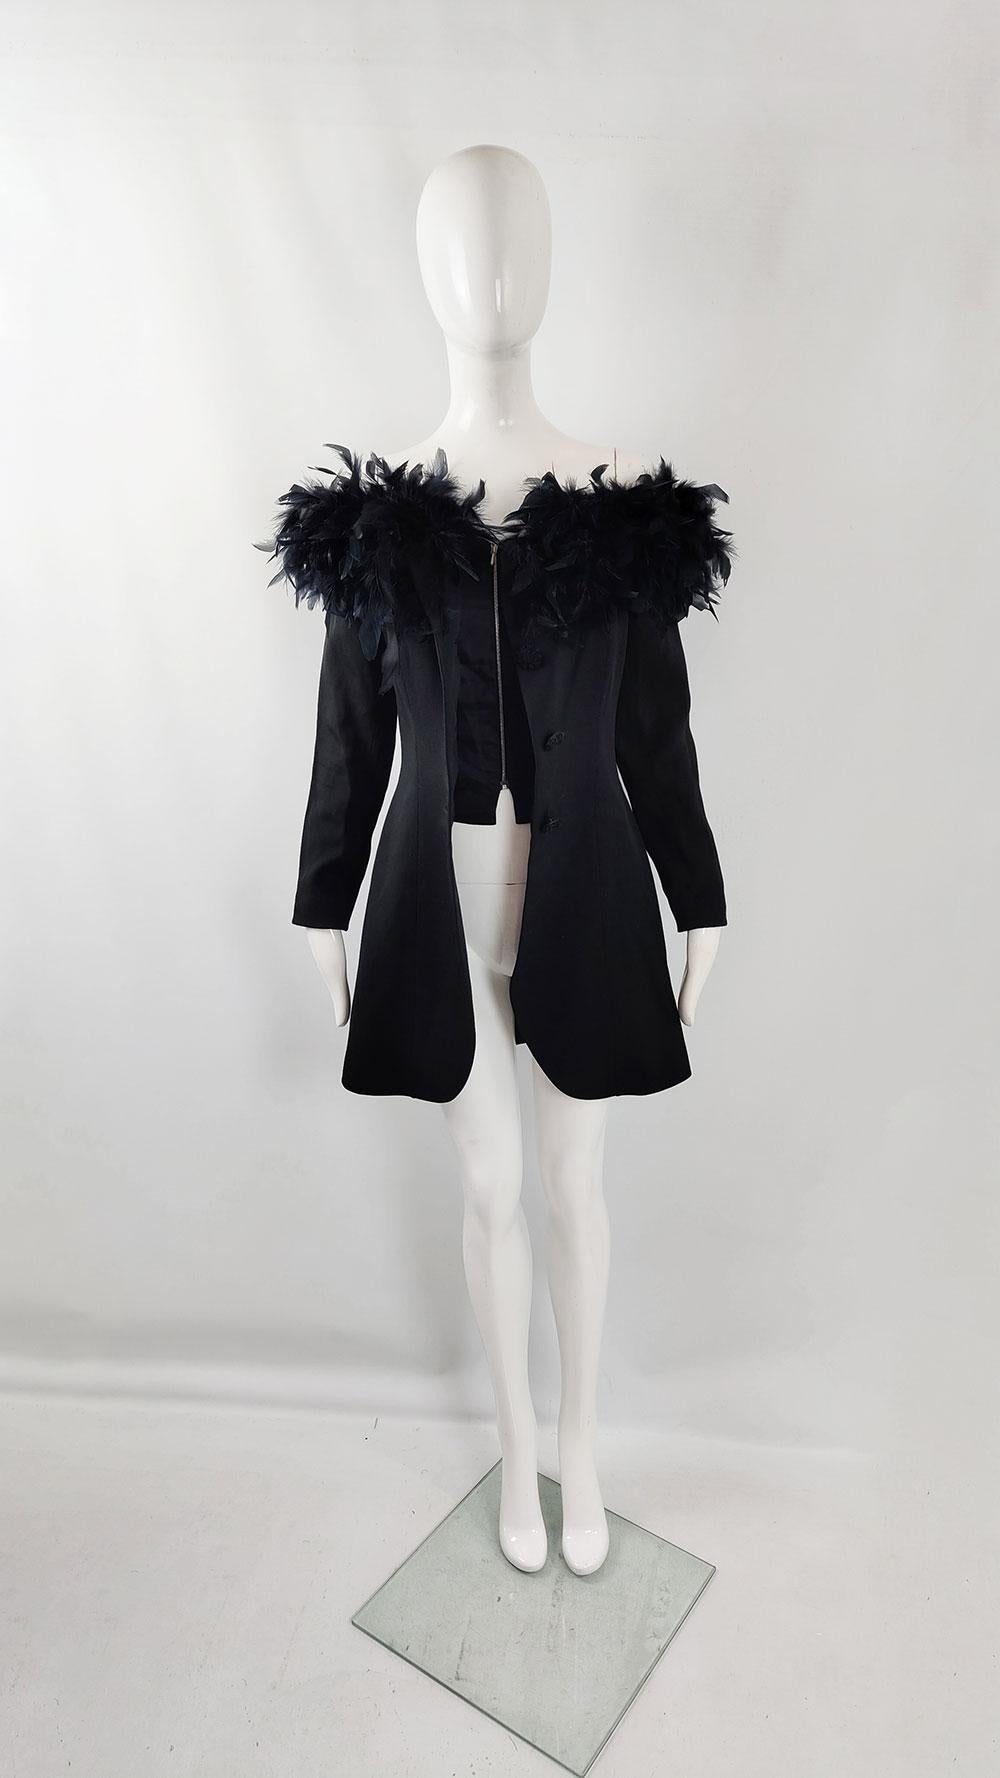 A glam vintage women's jacket from the late 80s/early 90s by French designer Georges Rech. In black acetate wool blend, it flaunts standout buttons, off-shoulder style with dark blue feather trim, and a zip-up inner boned corset.

Size: Marked EU 38